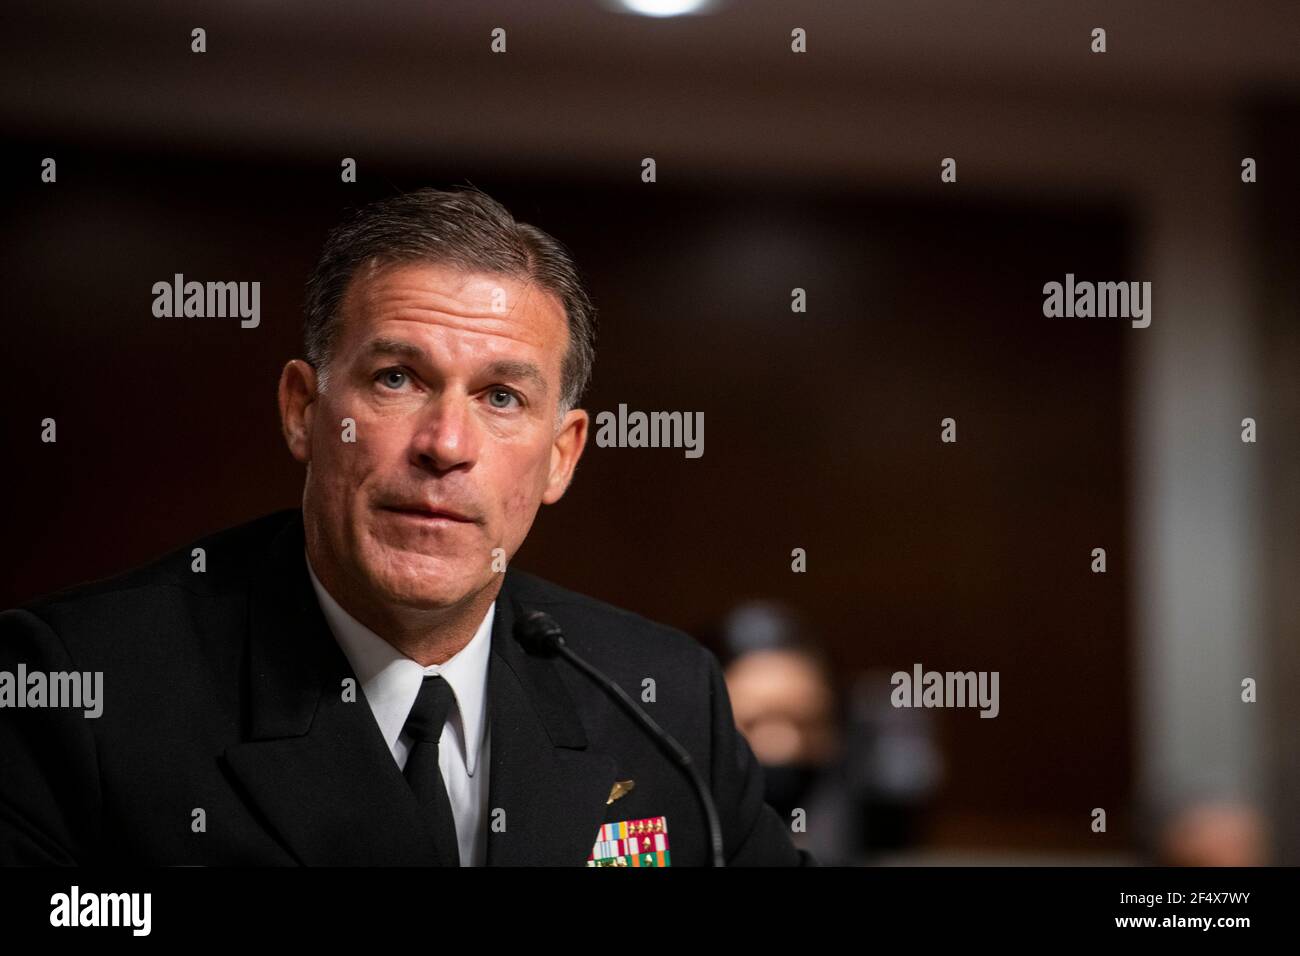 Admiral John C. Aquilino, USN, appears at a Senate Committee on Armed Services hearing regarding his nomination for reappointment to the grade of admiral and to be Commander, United States Indo-Pacific Command, Department of Defense, in the Dirksen Senate Office Building in Washington, DC, Tuesday, March 23, 2021. Credit: Rod Lamkey/CNP /MediaPunch Stock Photo